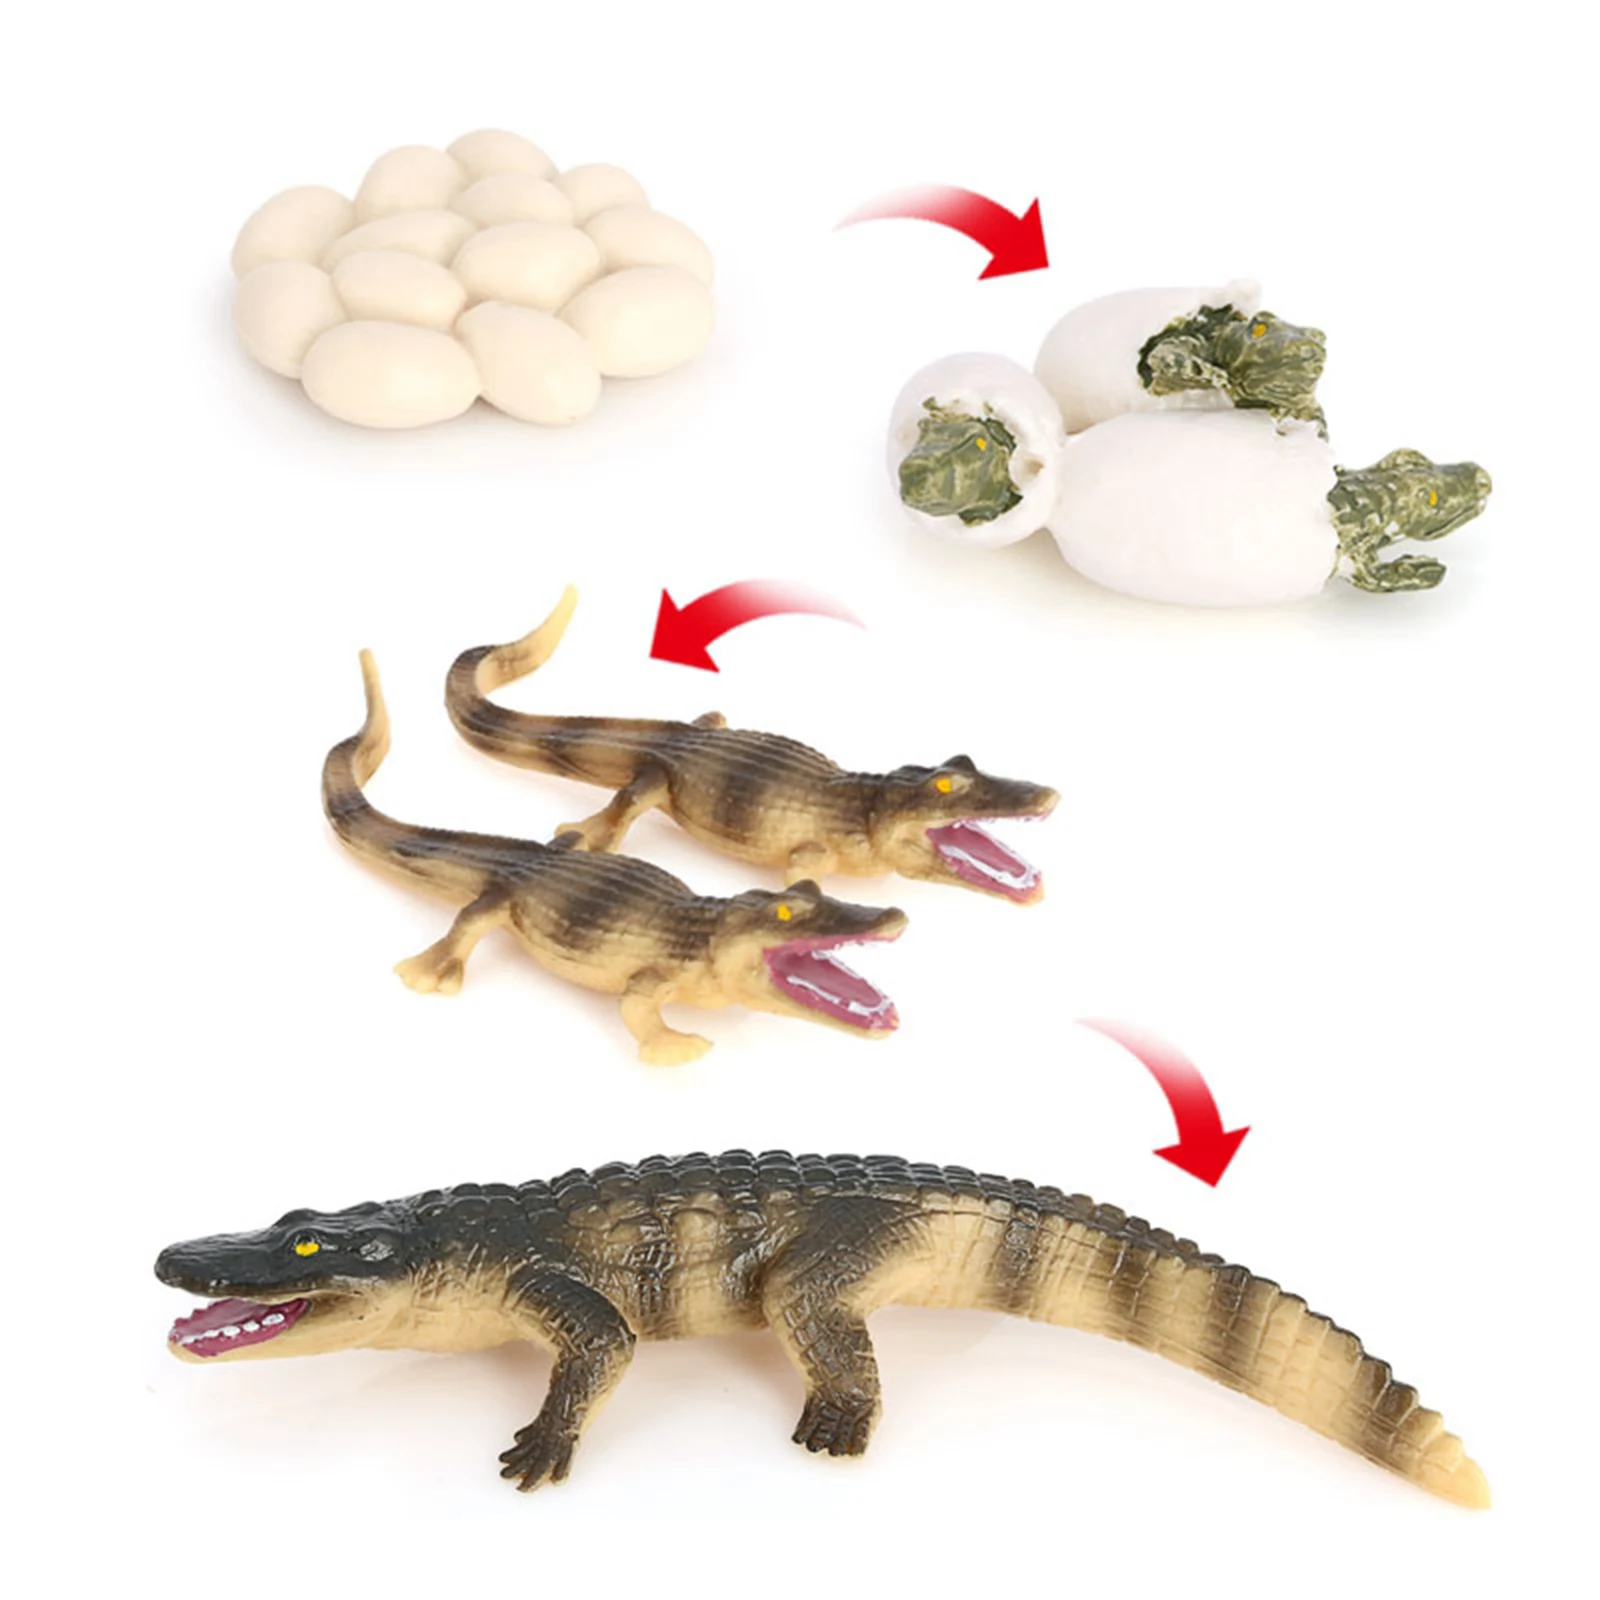 Life Cycle of a CrocodileNature Insects Life Cycles Growth Model Game PropSimulation Insect Animal Natural Education Toy